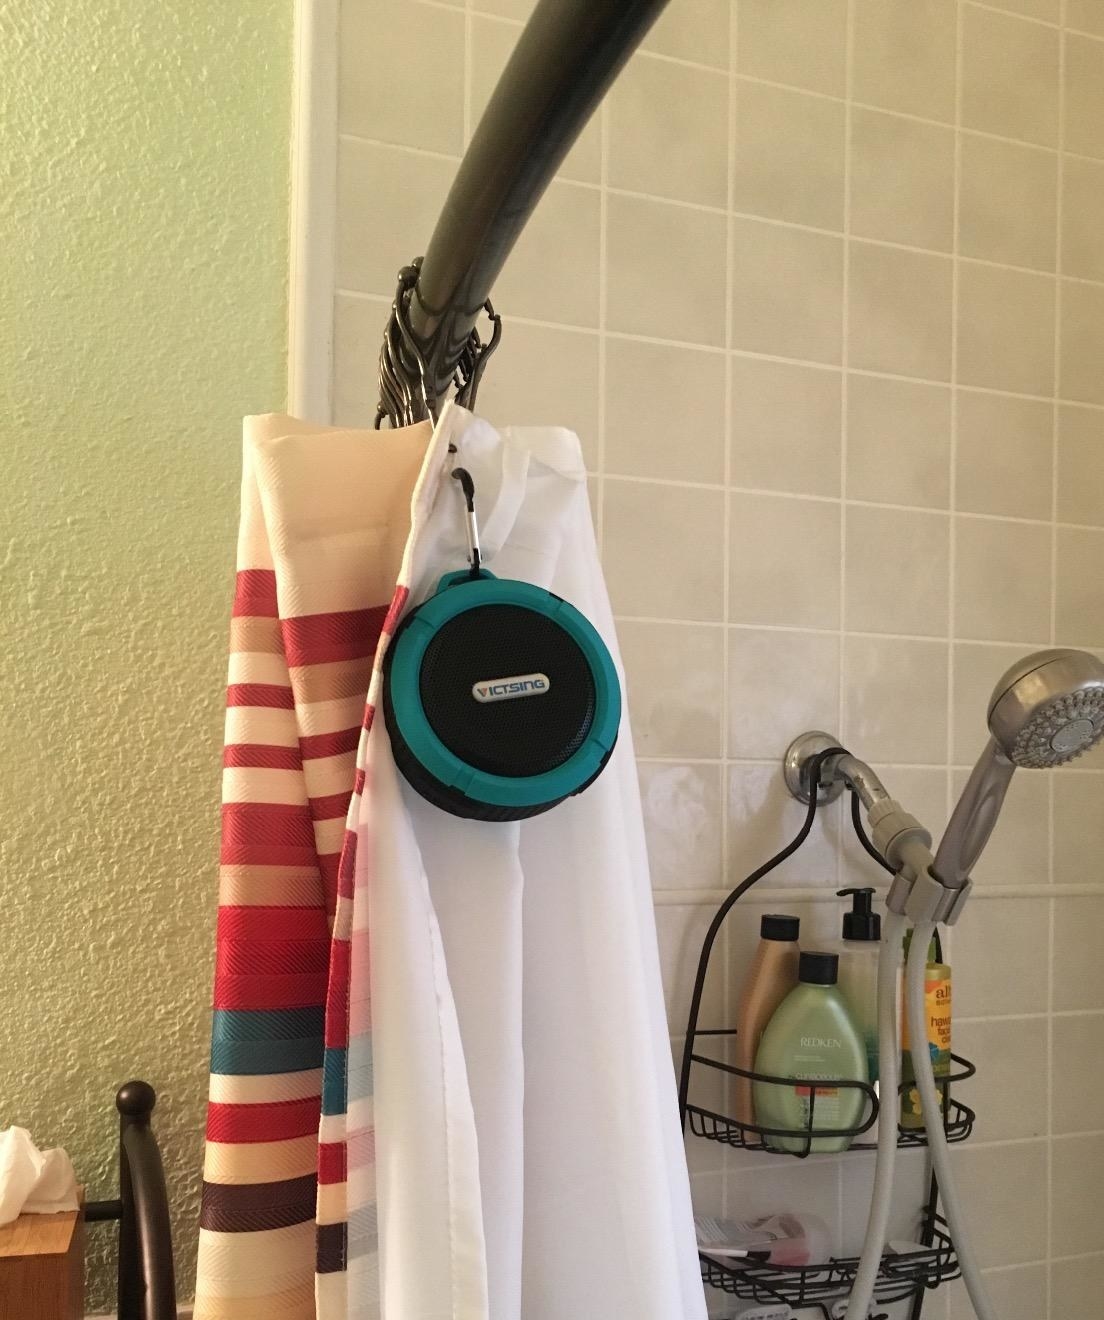 The round blue speaker hanging from a shower rod